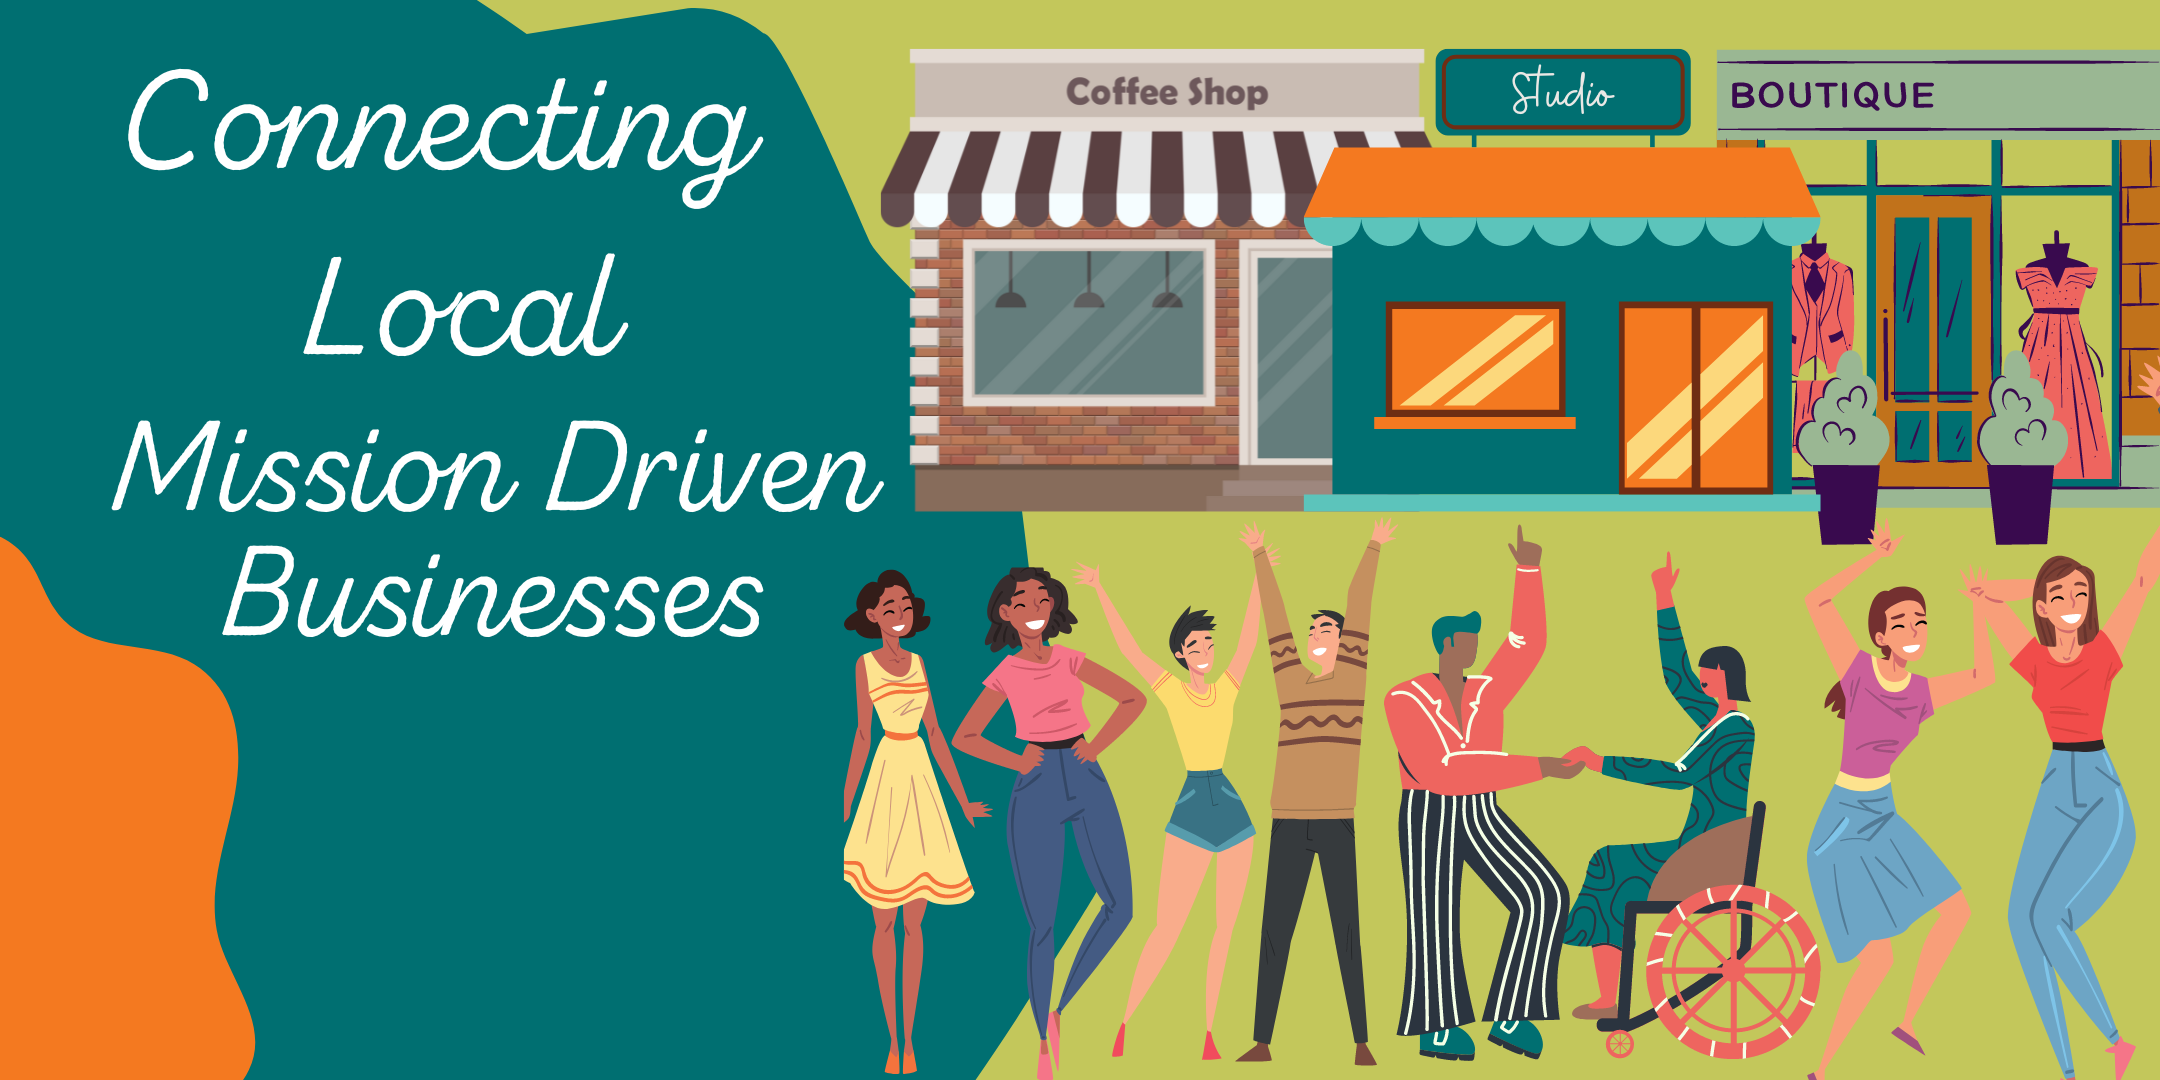 Networking for Local Mission-Driven Entrepreneurs and Small Businesses